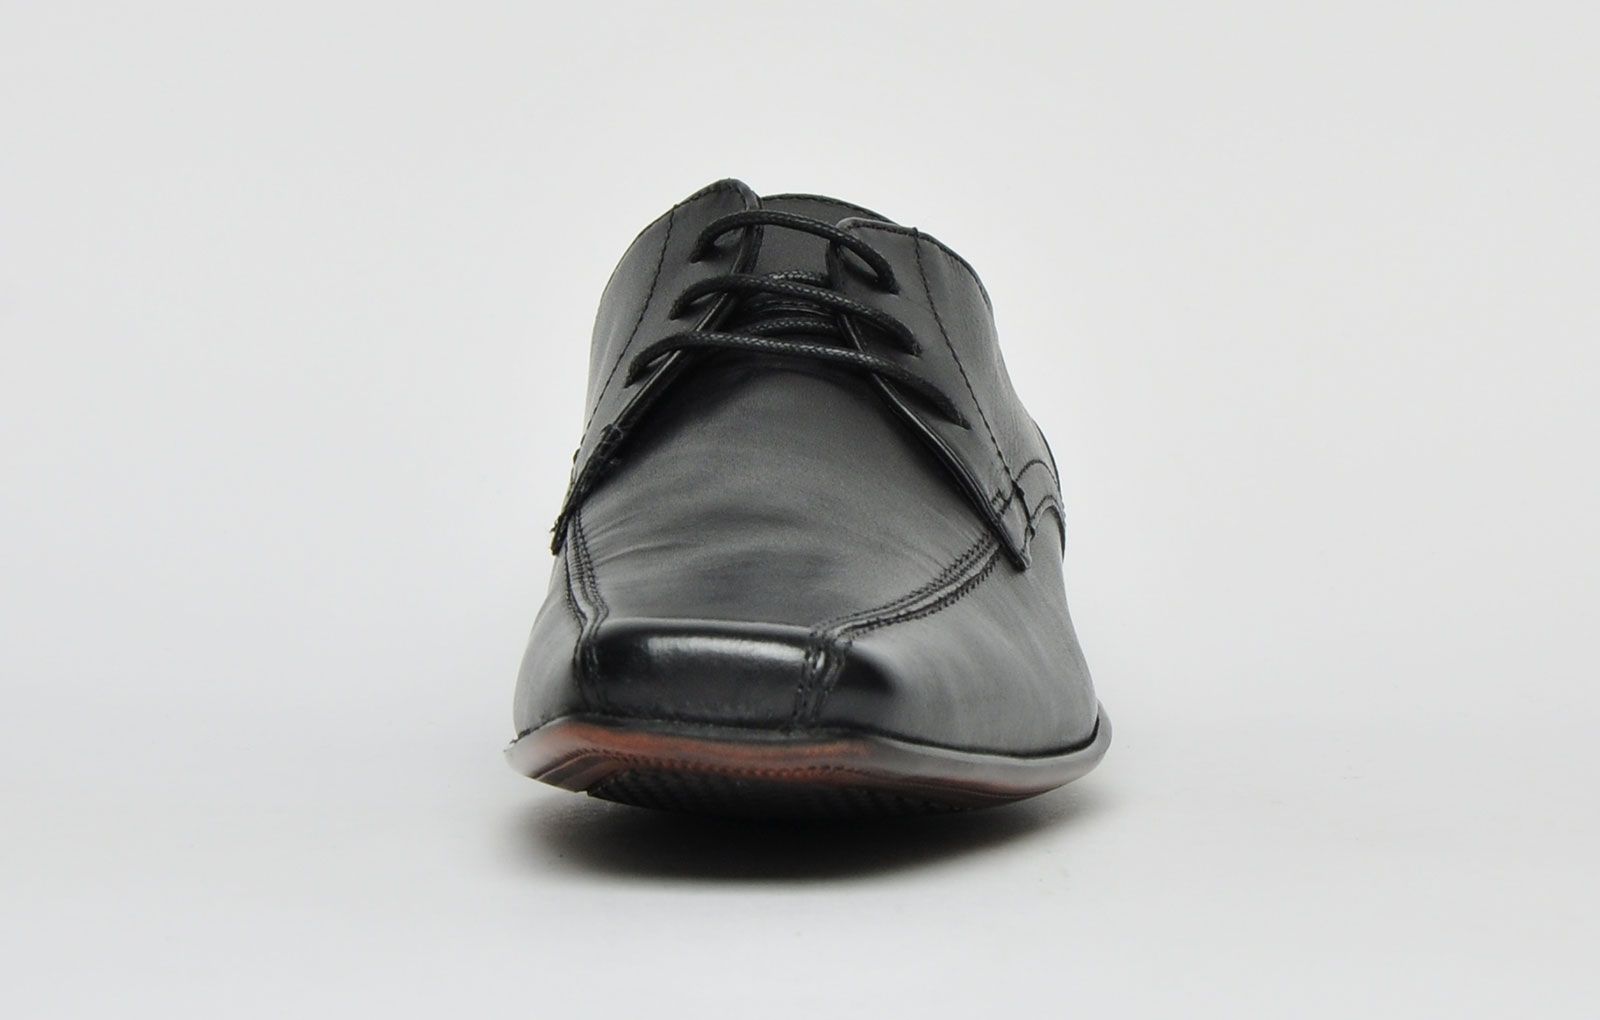 These Ikon men’s premium leather shoes will make a perfect addition to your footwear collection. <p>Engineered for the modern-day man these stylish leather shoes are crammed full of vintage charisma. The Slimline silhouette is crafted using premium leathers, finished with neat panel construction and tonal stitching for a timeless retro look</p> <p>These Ikon Fraser men’s shoes feature a 3 lace up front fastening, combined with a premium leather/textile inner lining, providing a comfortable and secure fit throughout your day</p> <p style=